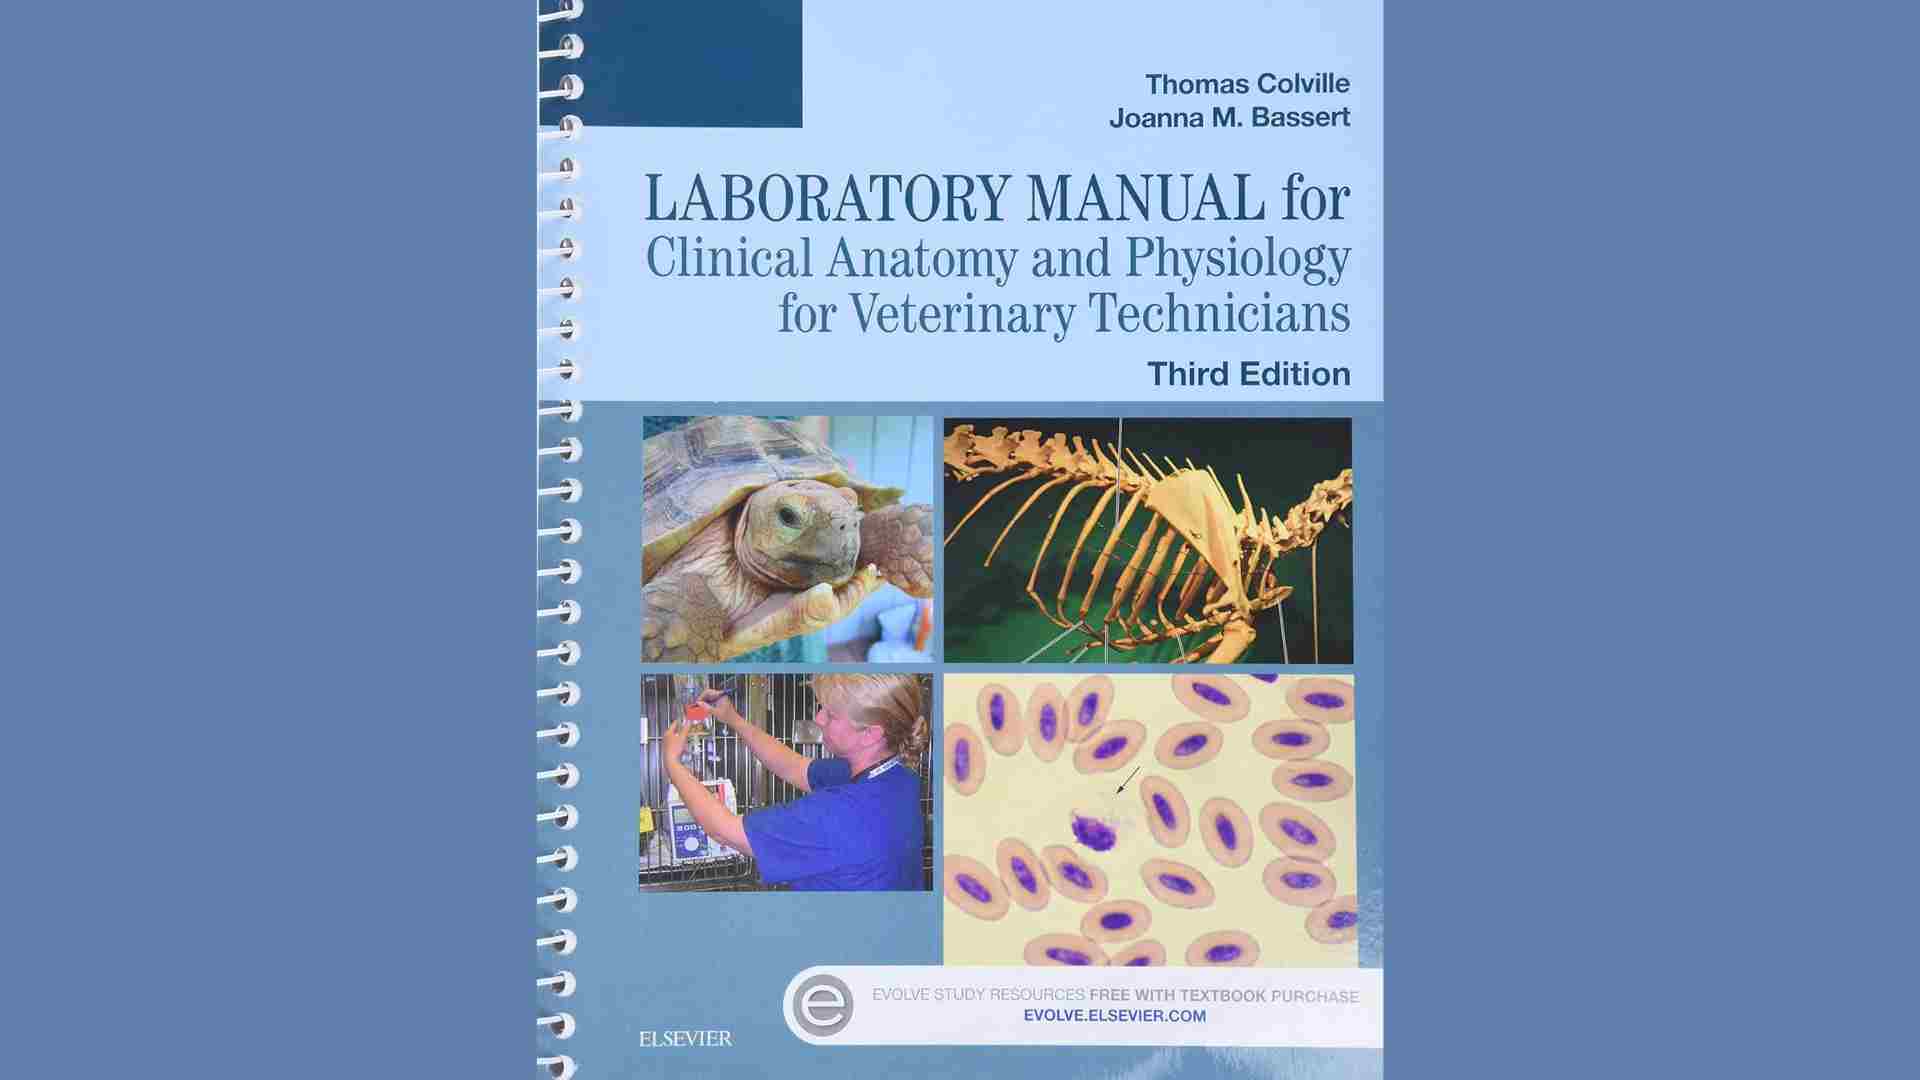 Clinical Anatomy and Physiology for Veterinary Technicians PDF Download